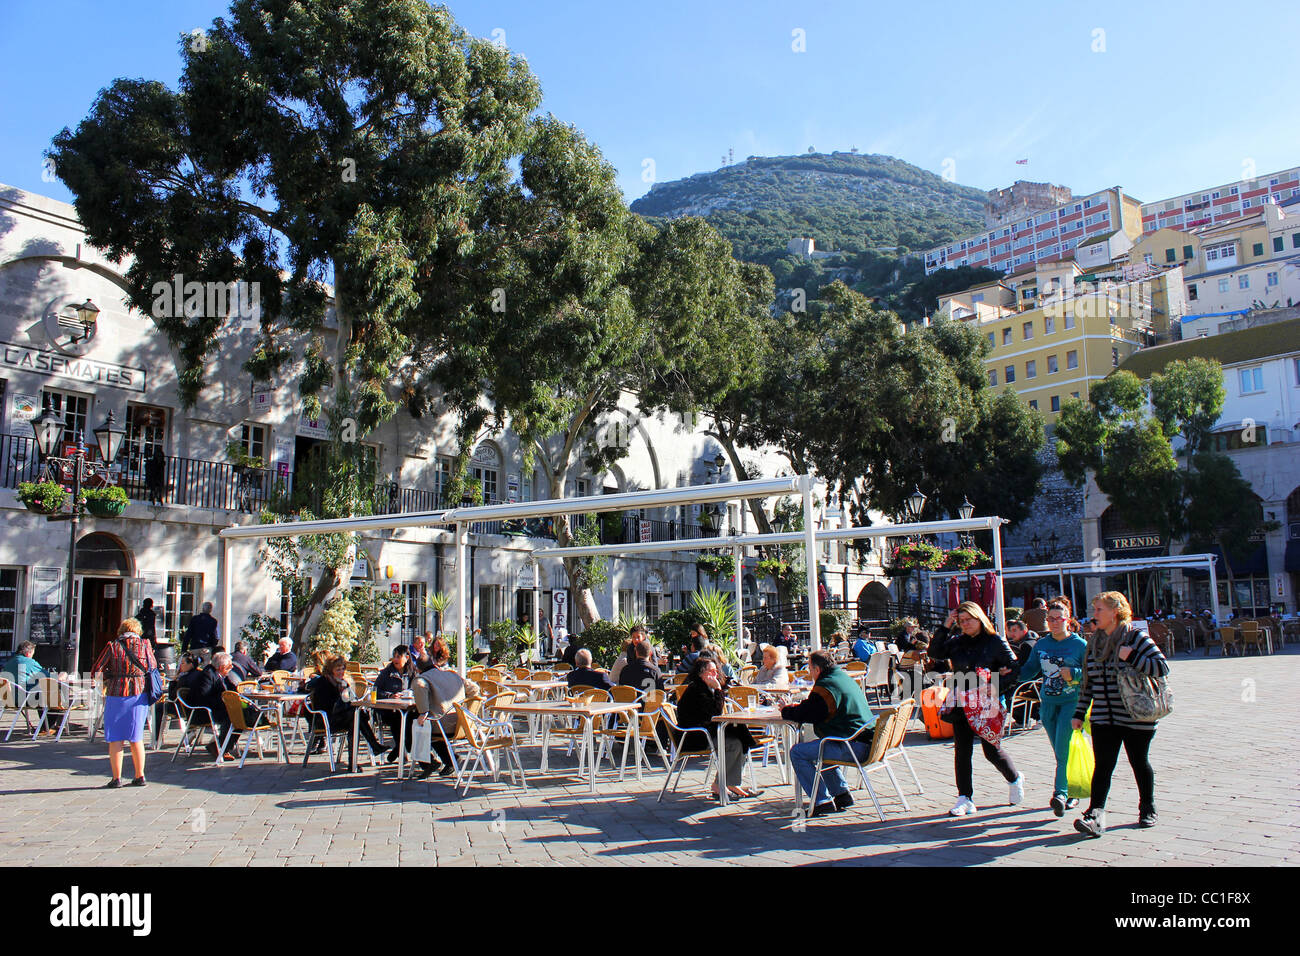 Shops And Cafes Are An Attraction For Tourists In Downtown Gibraltar Stock Photo Alamy